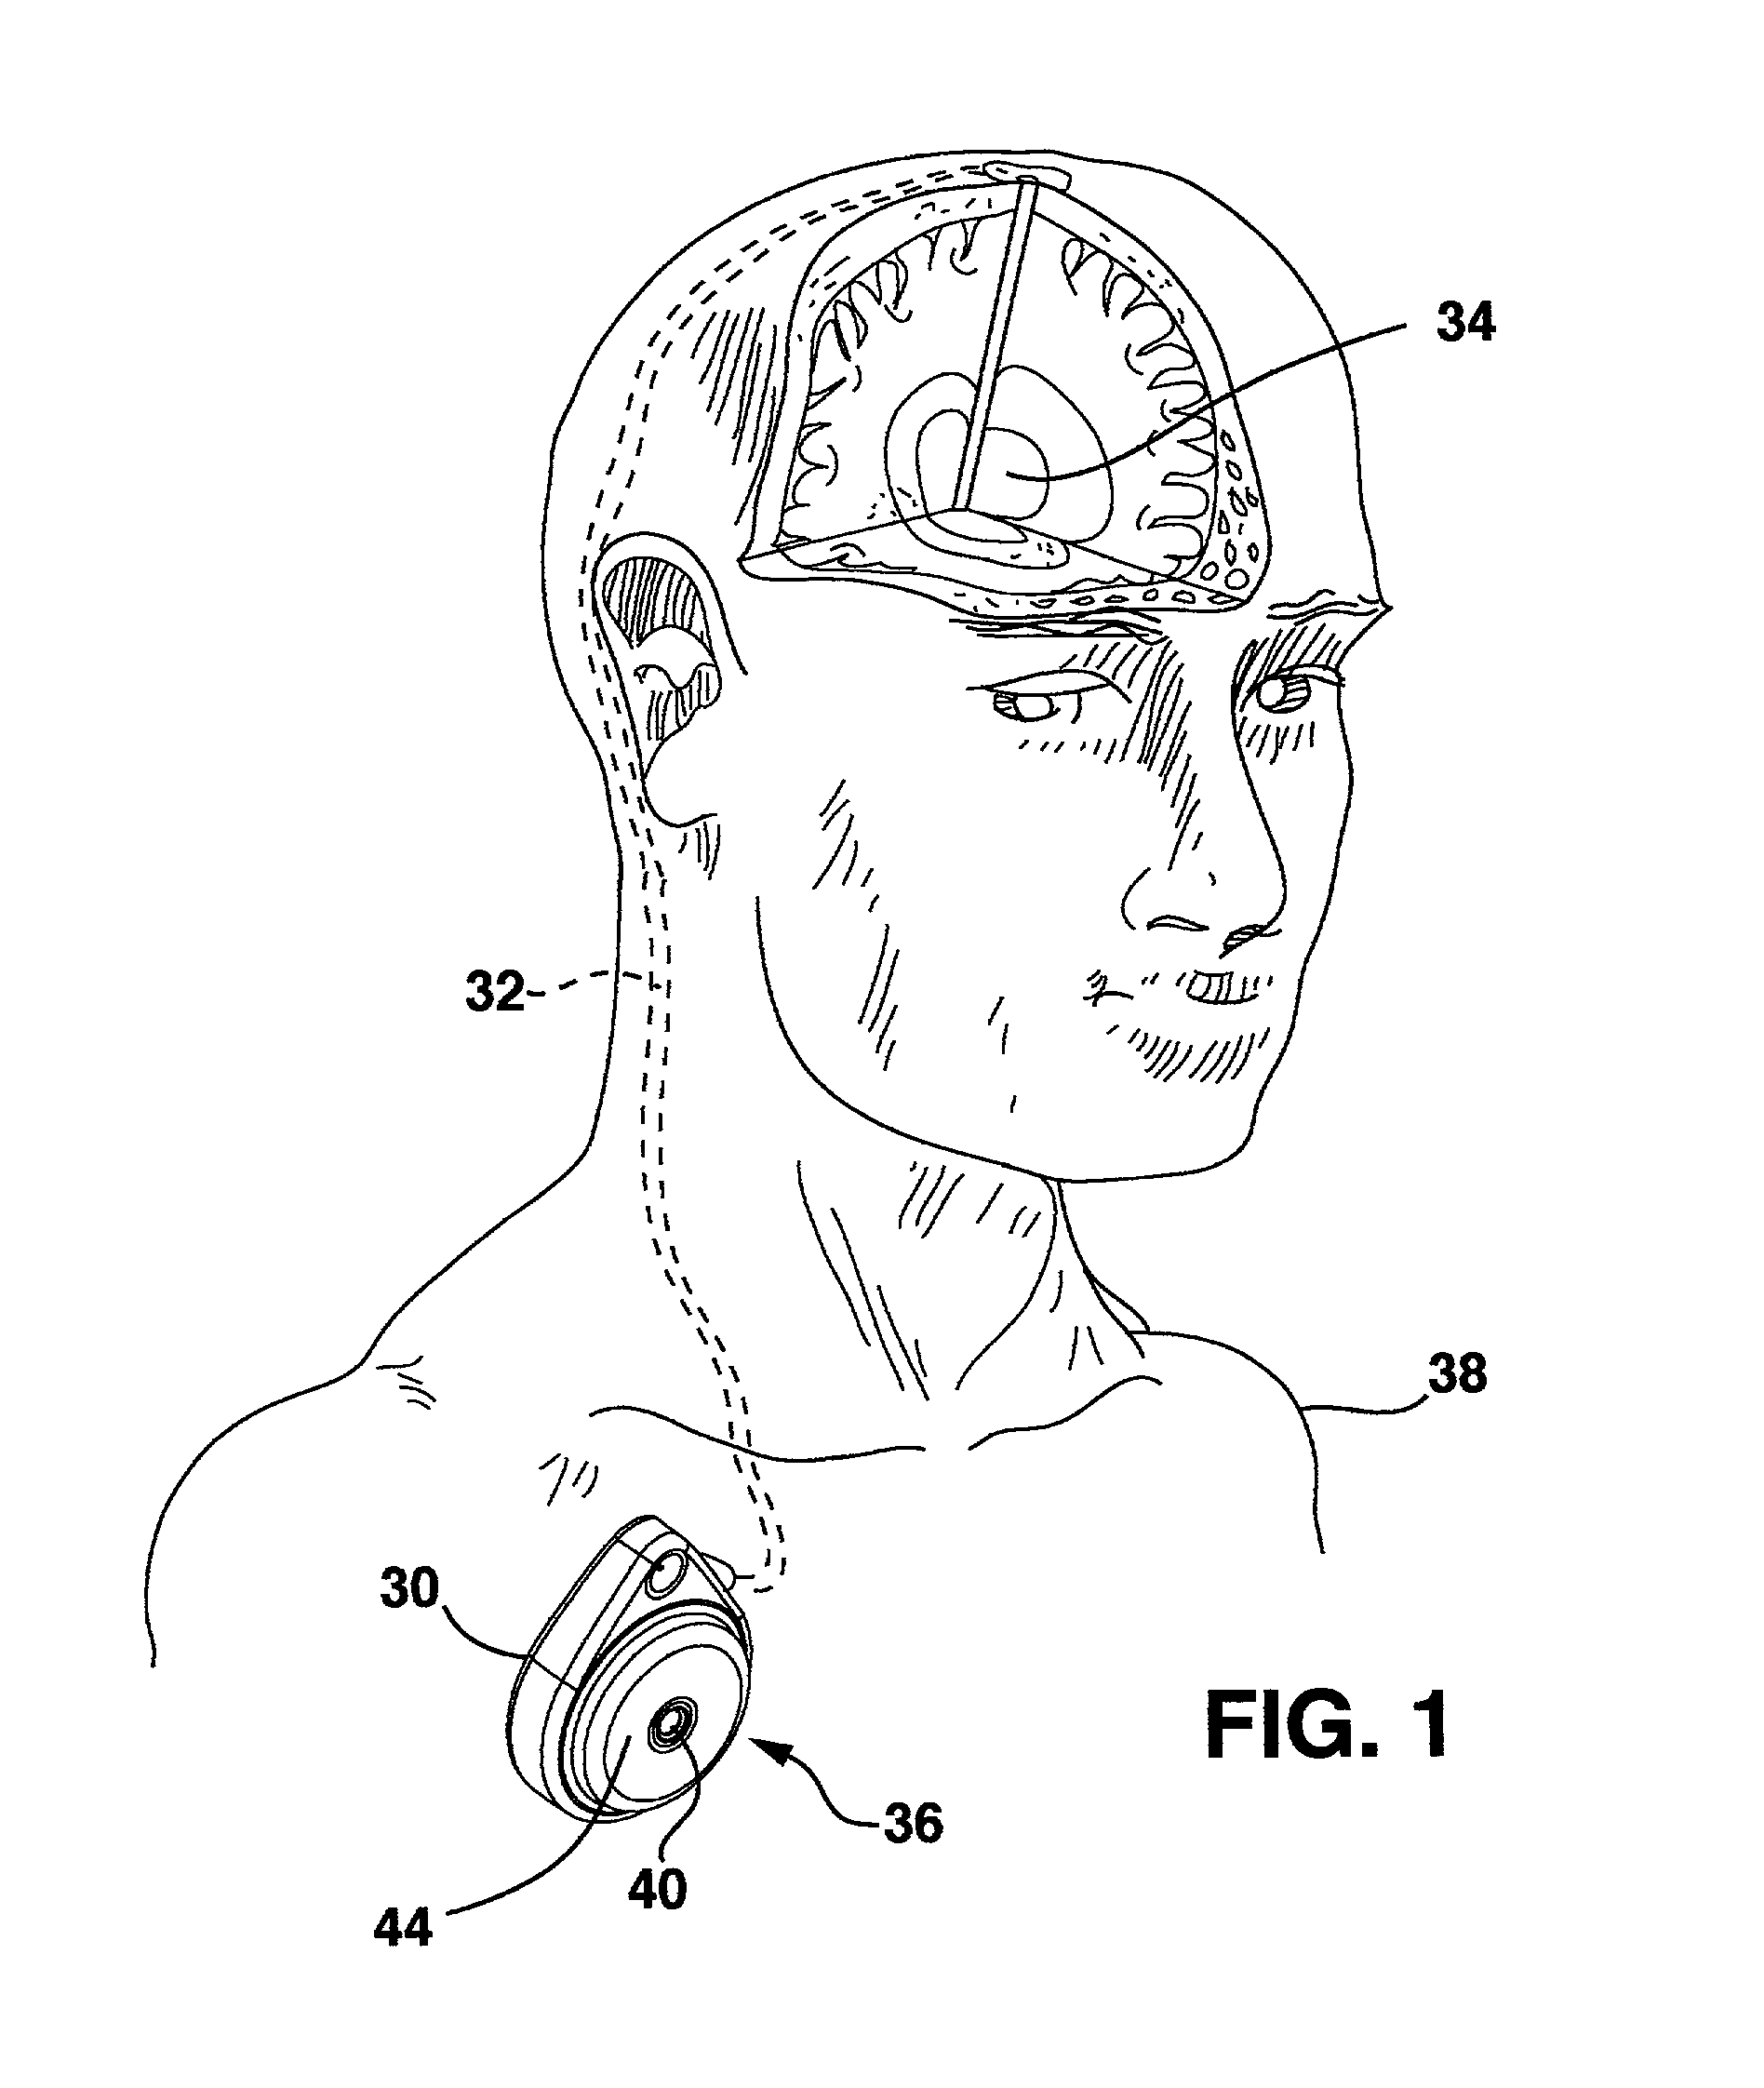 Implantable infusion device with motor connection and seal system